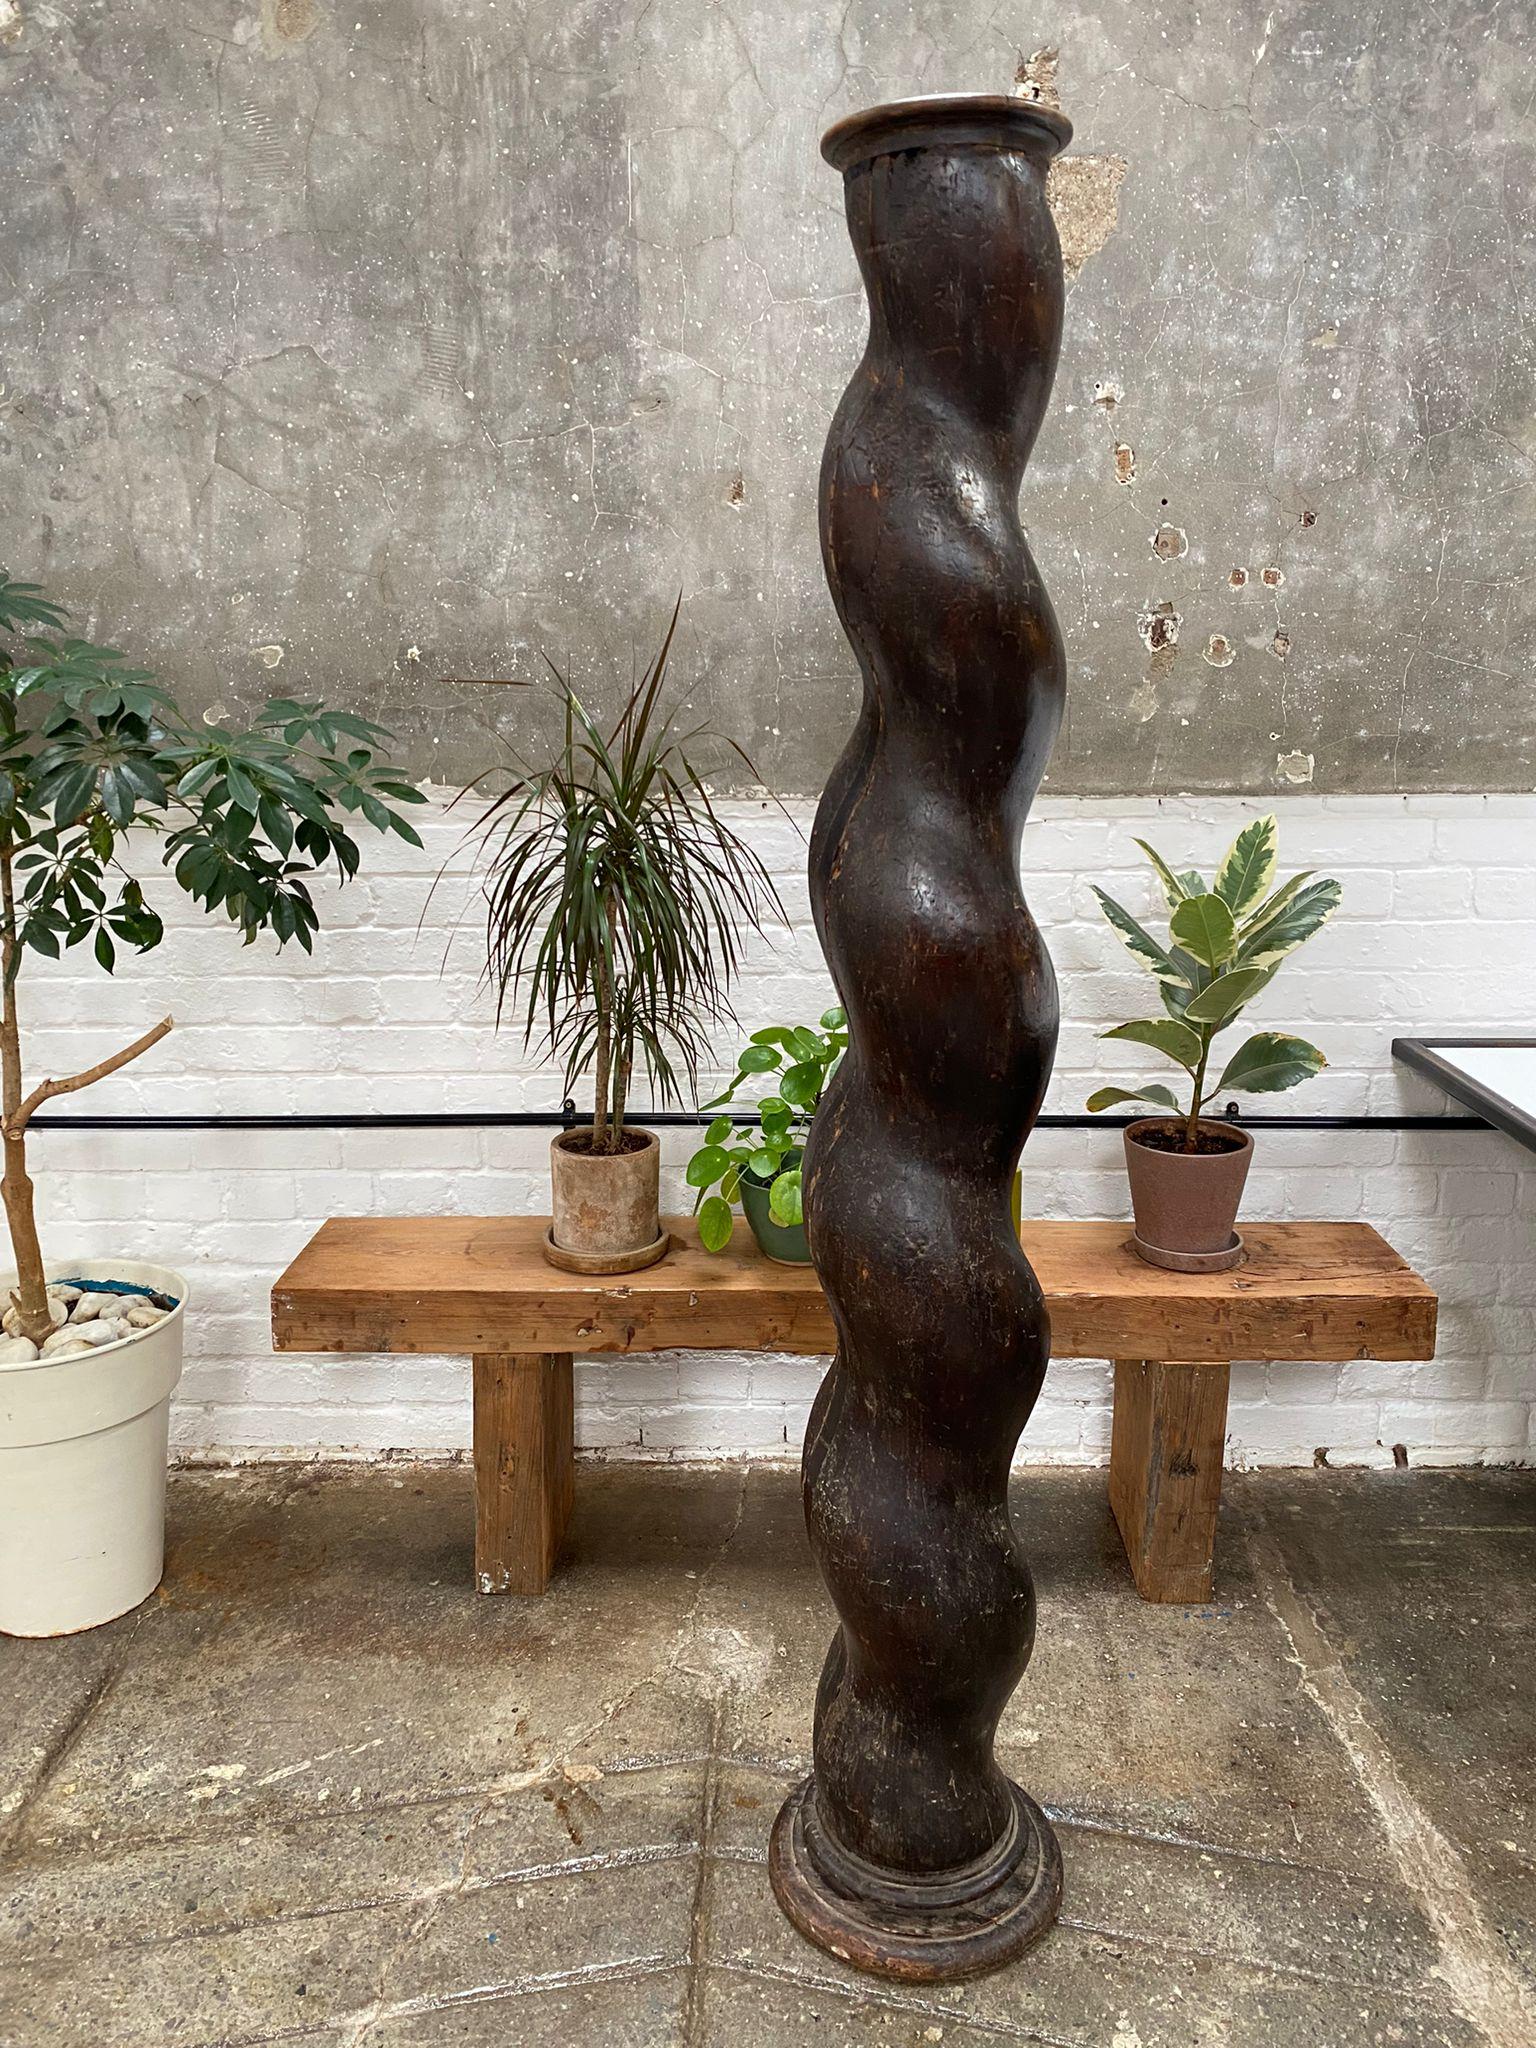 A stunning rich, textural, sculptural column. It is a gentle twist, hand carved, perfect for showing sculpture, floral displays, adding an ancient architectural element to a room. I love this piece! 

It is stable and heavy, tall and good looking.